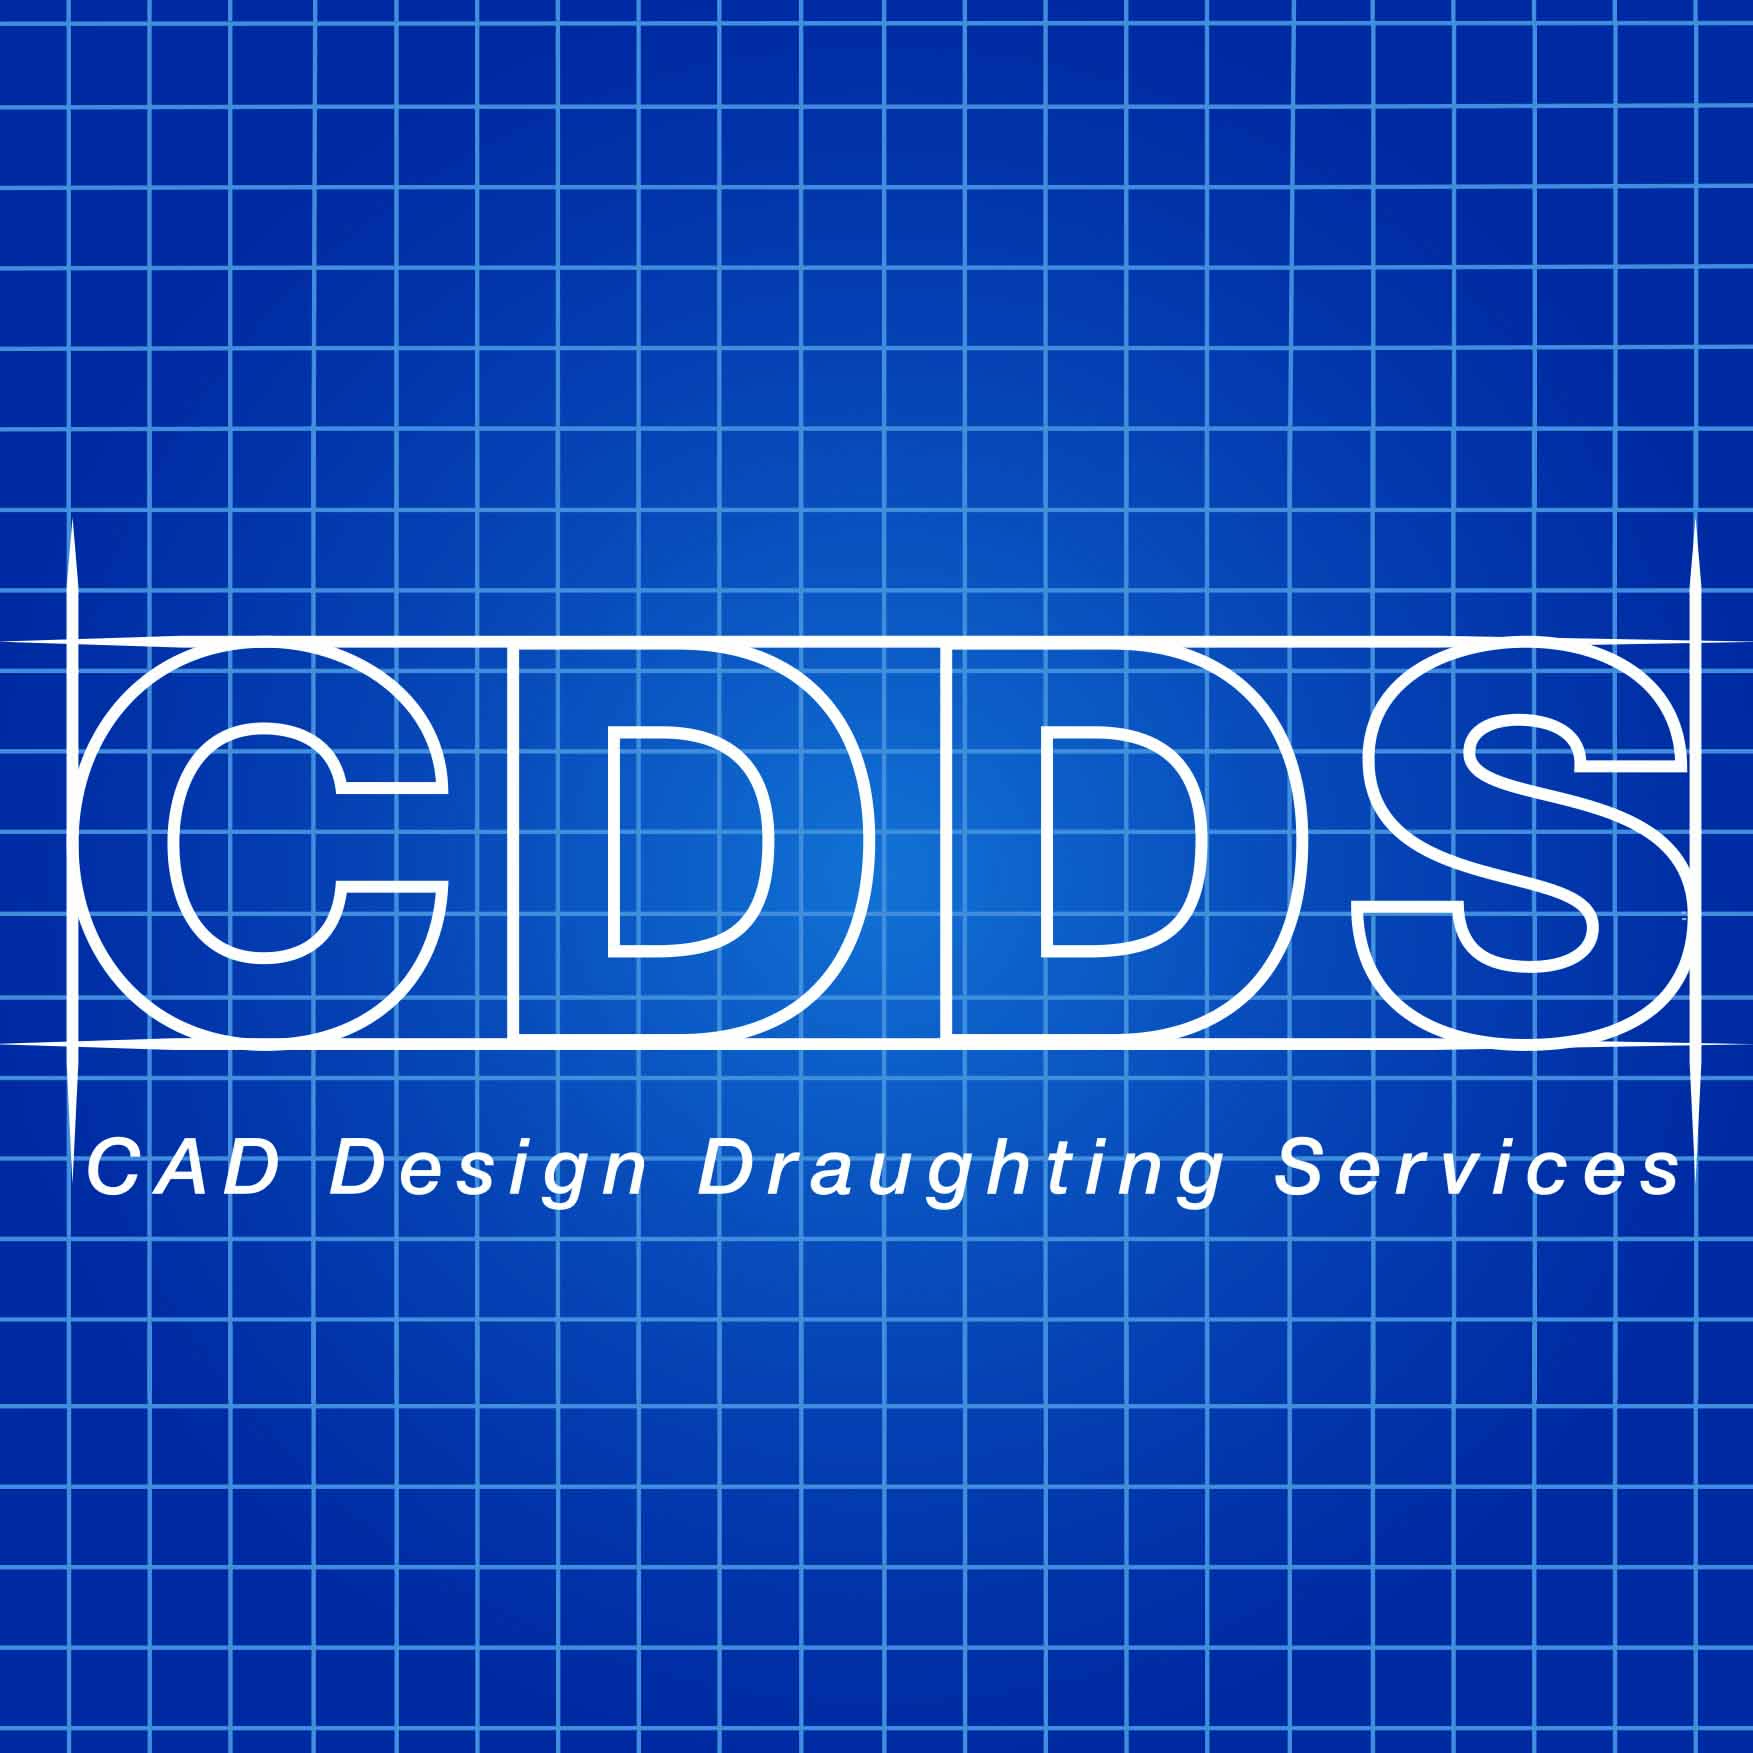 CAD Design Draughting Services